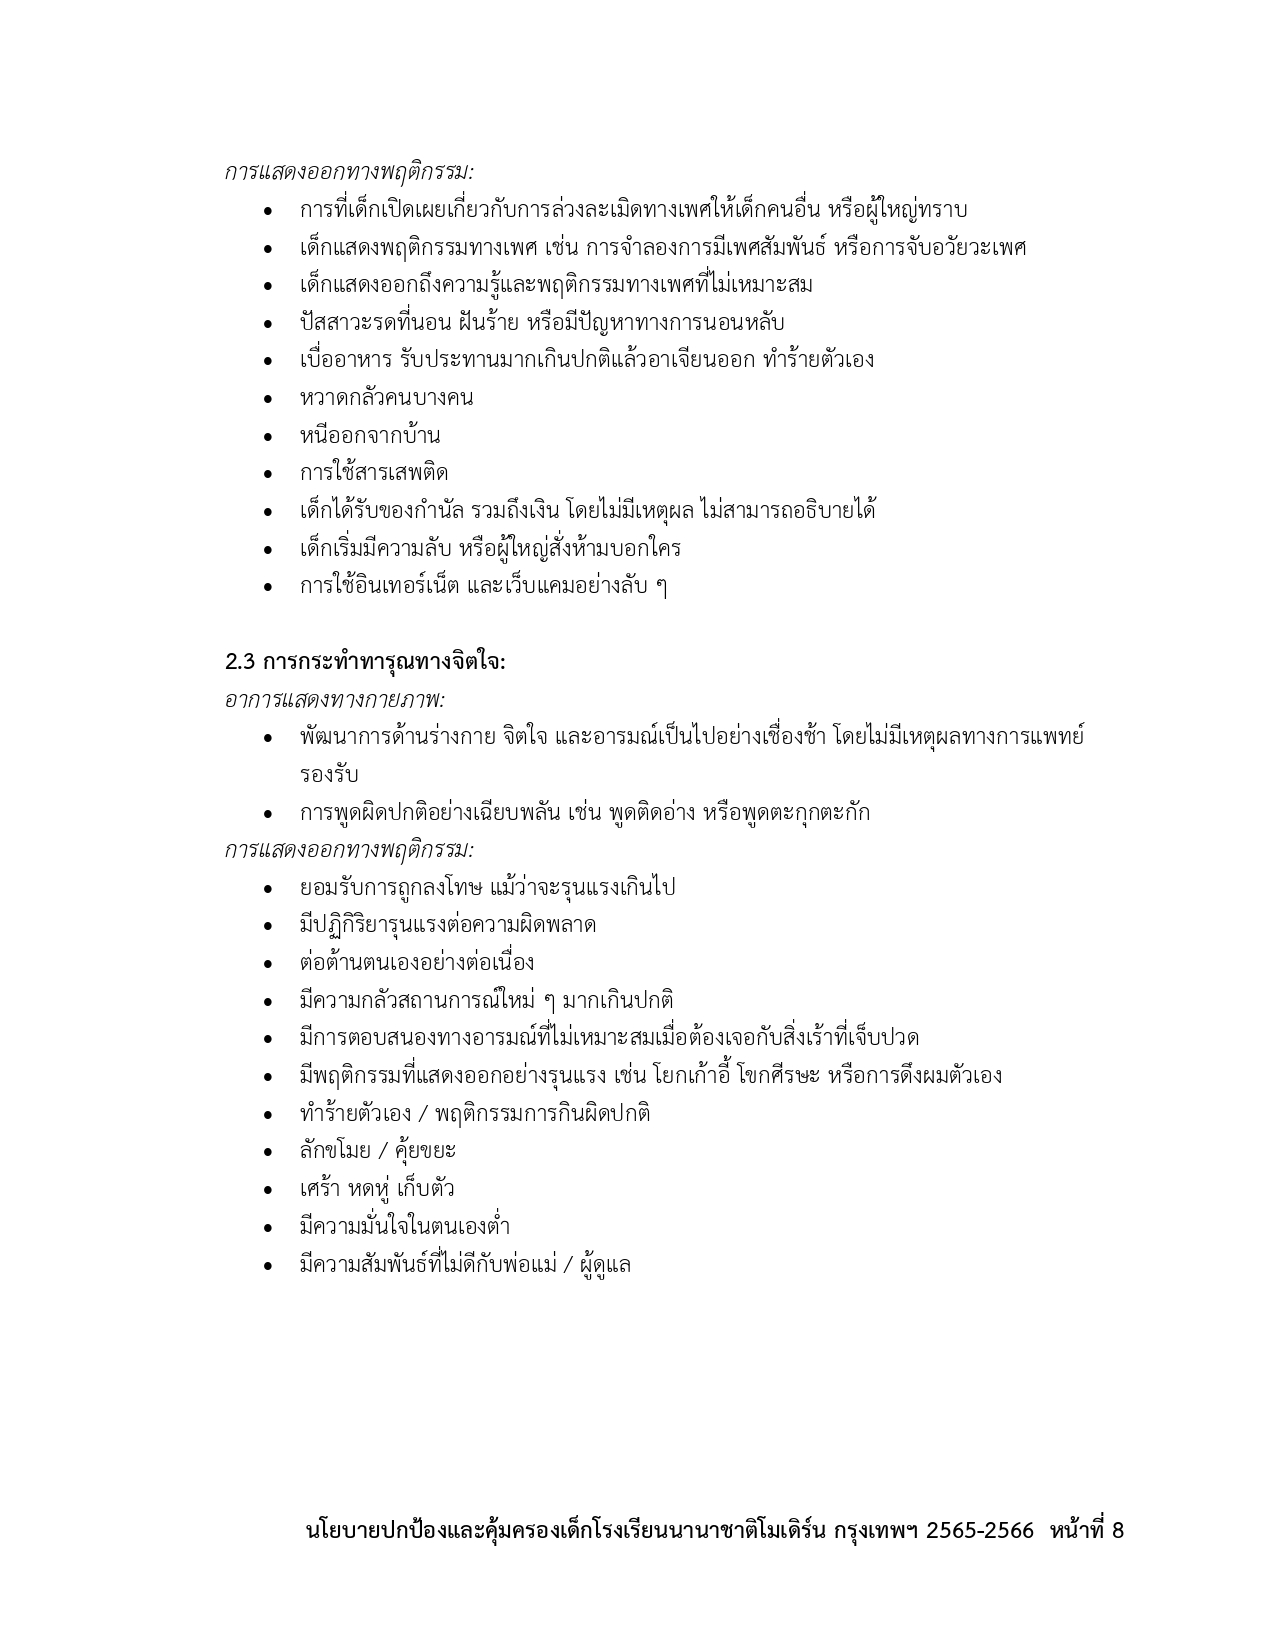 Child Protection Policy Thai Version page 0008